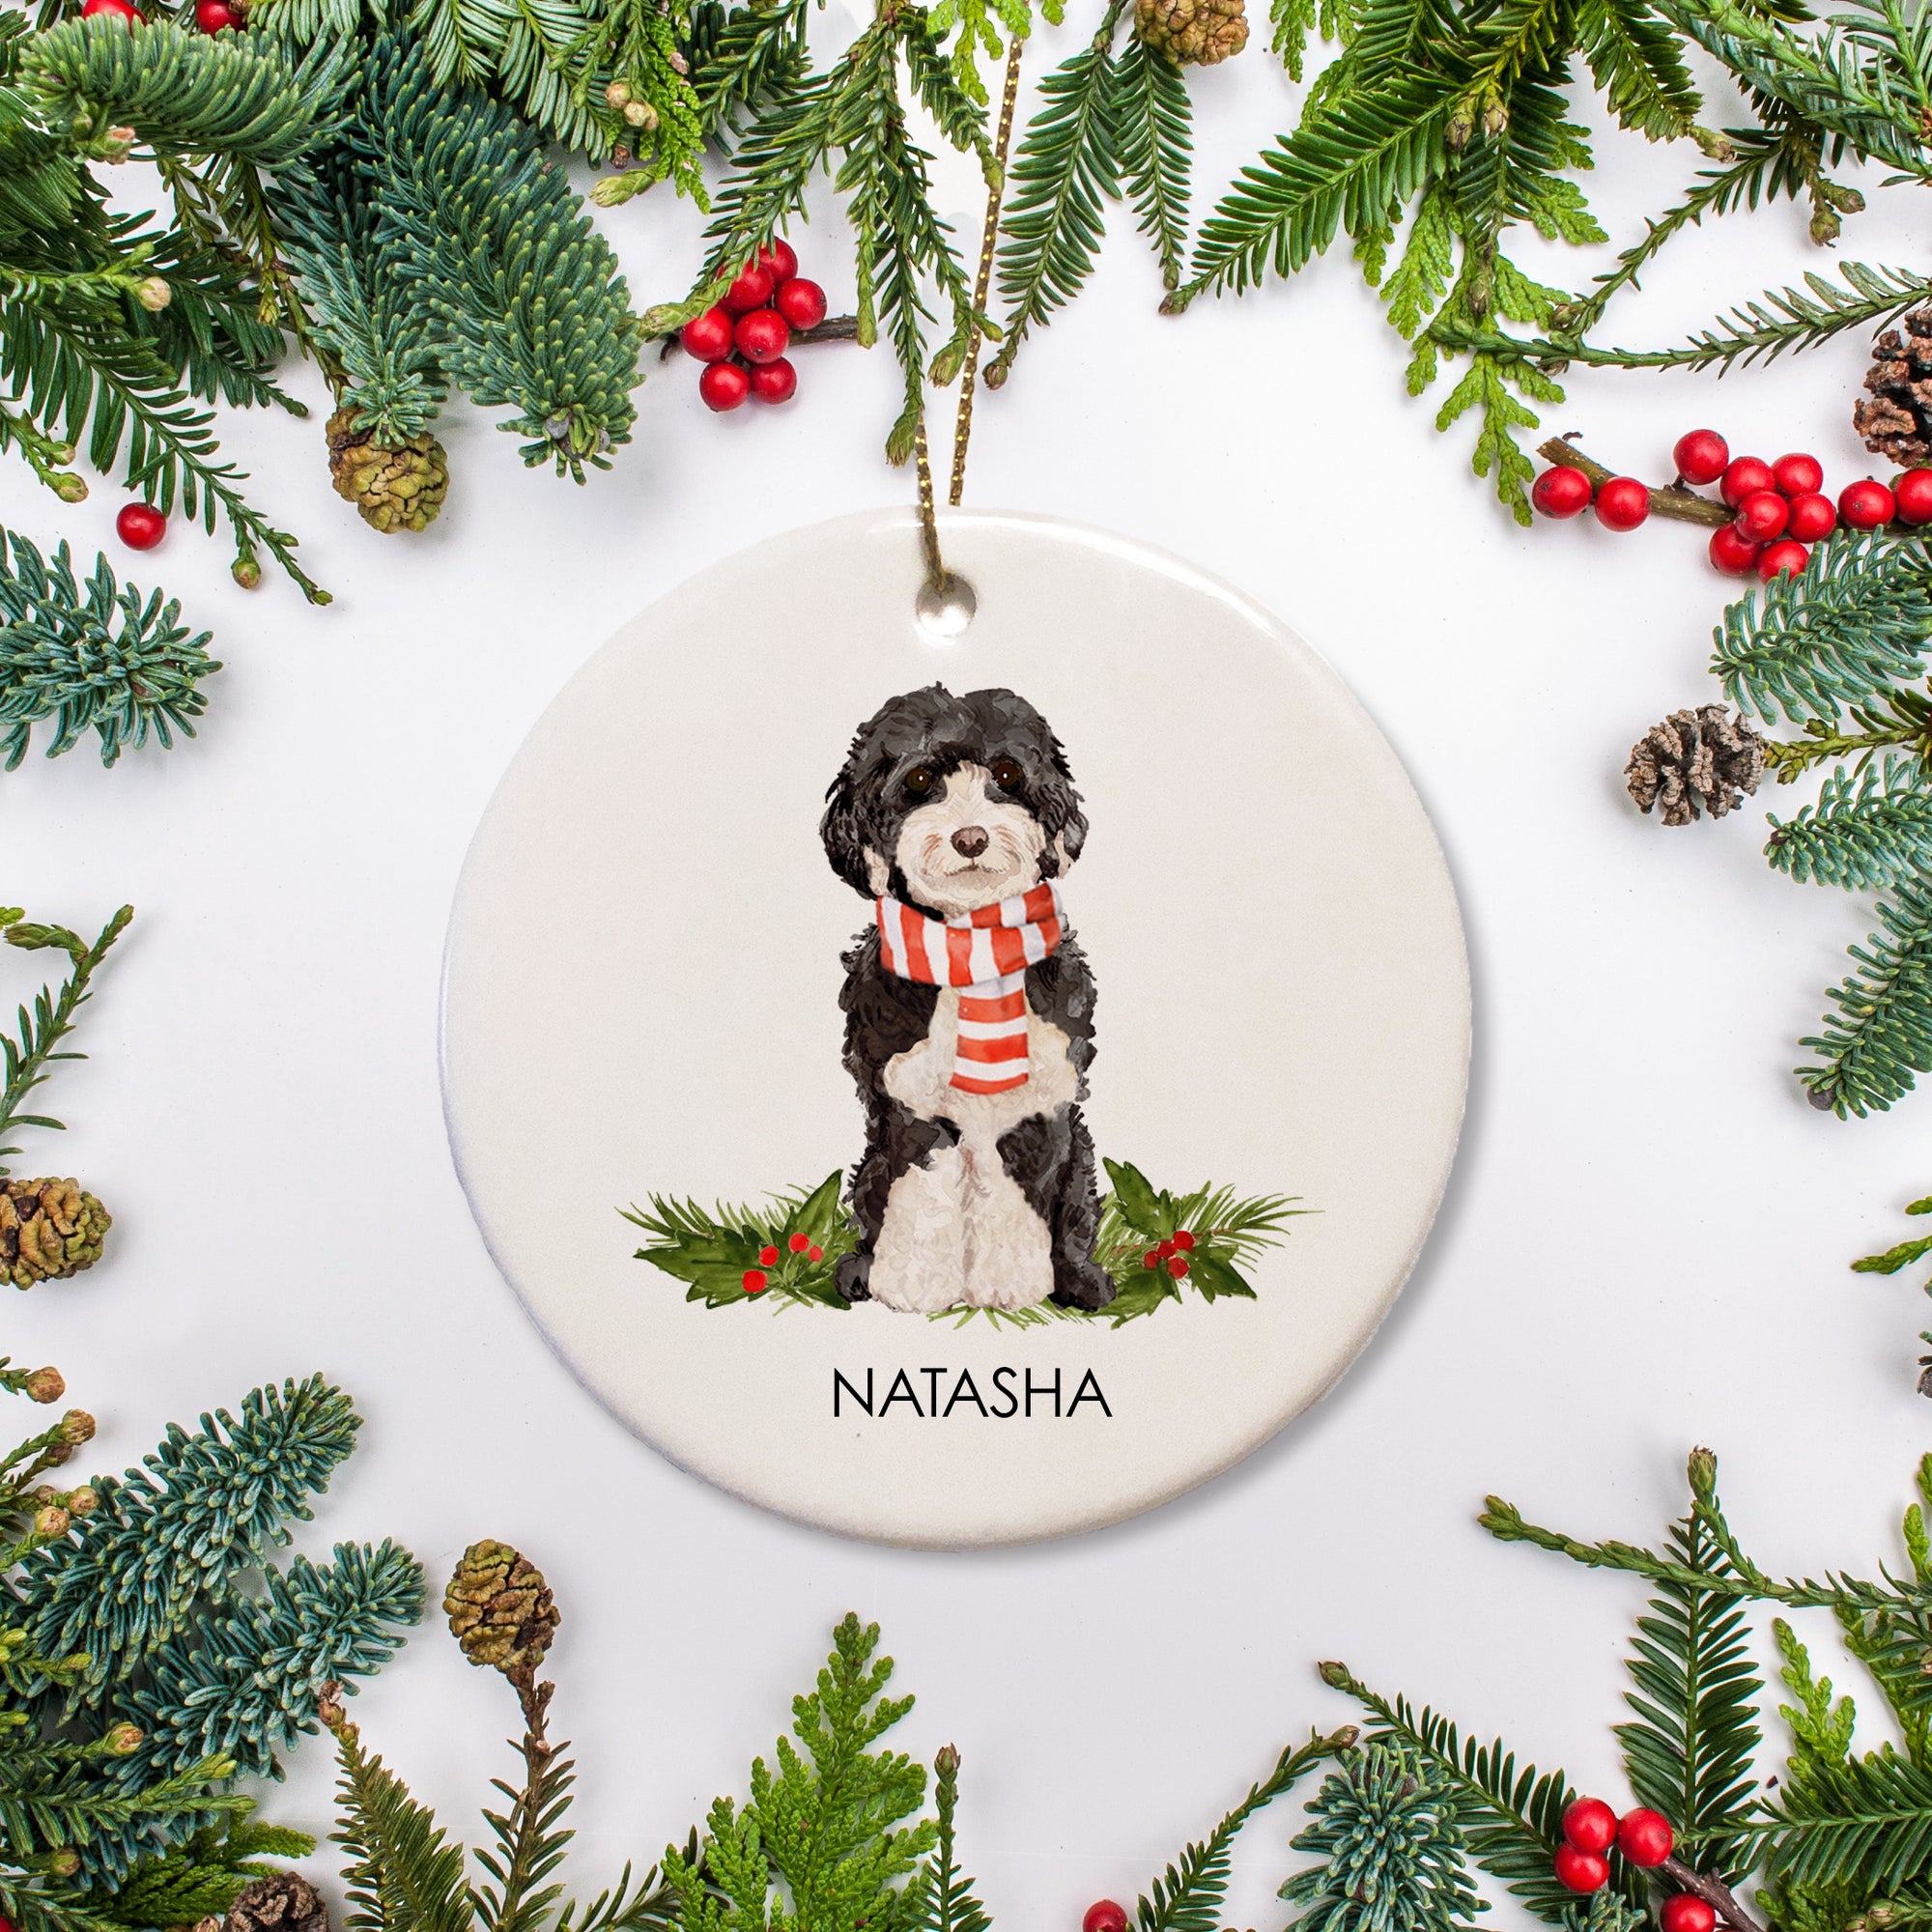 Cockapoo christmas ornament, featuring a black and white dog in a holiday scart. Personalized with your pet's name and crafted of ceramic